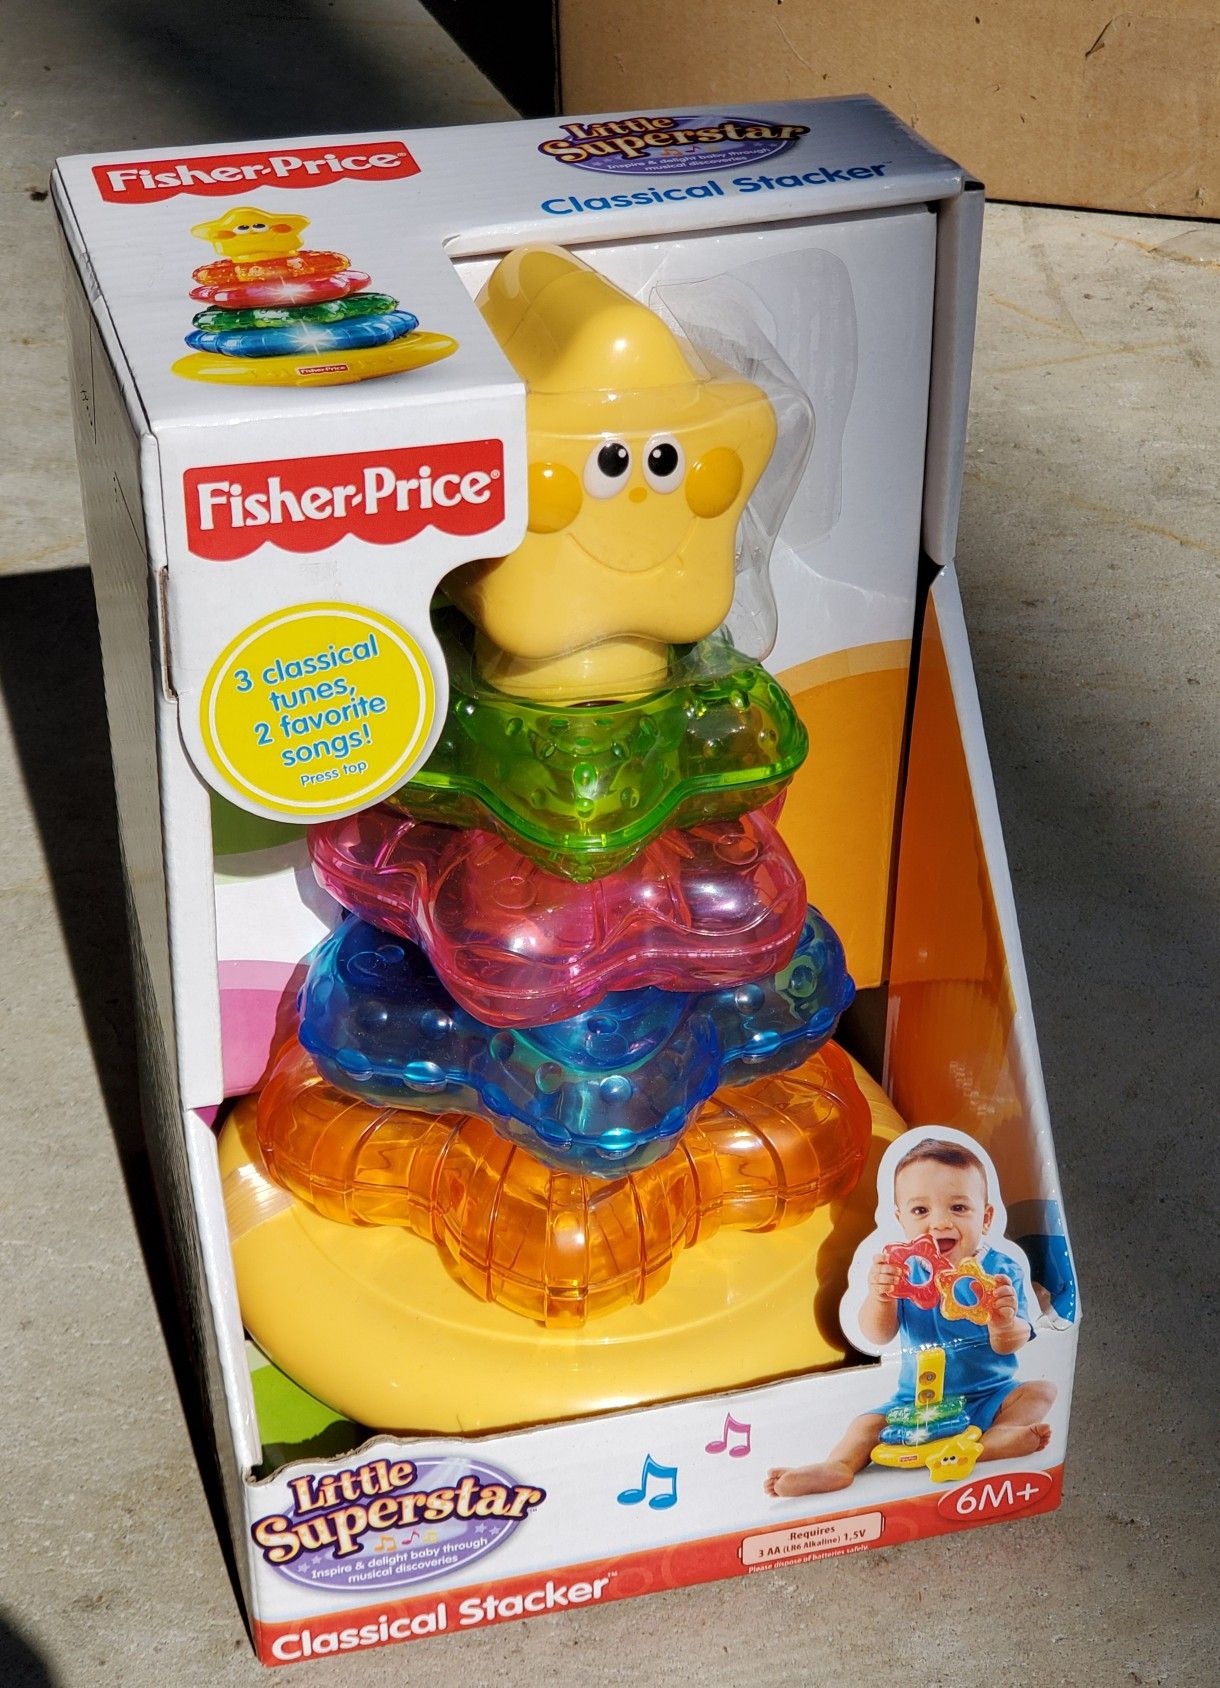 New Fisher Price classical stacker